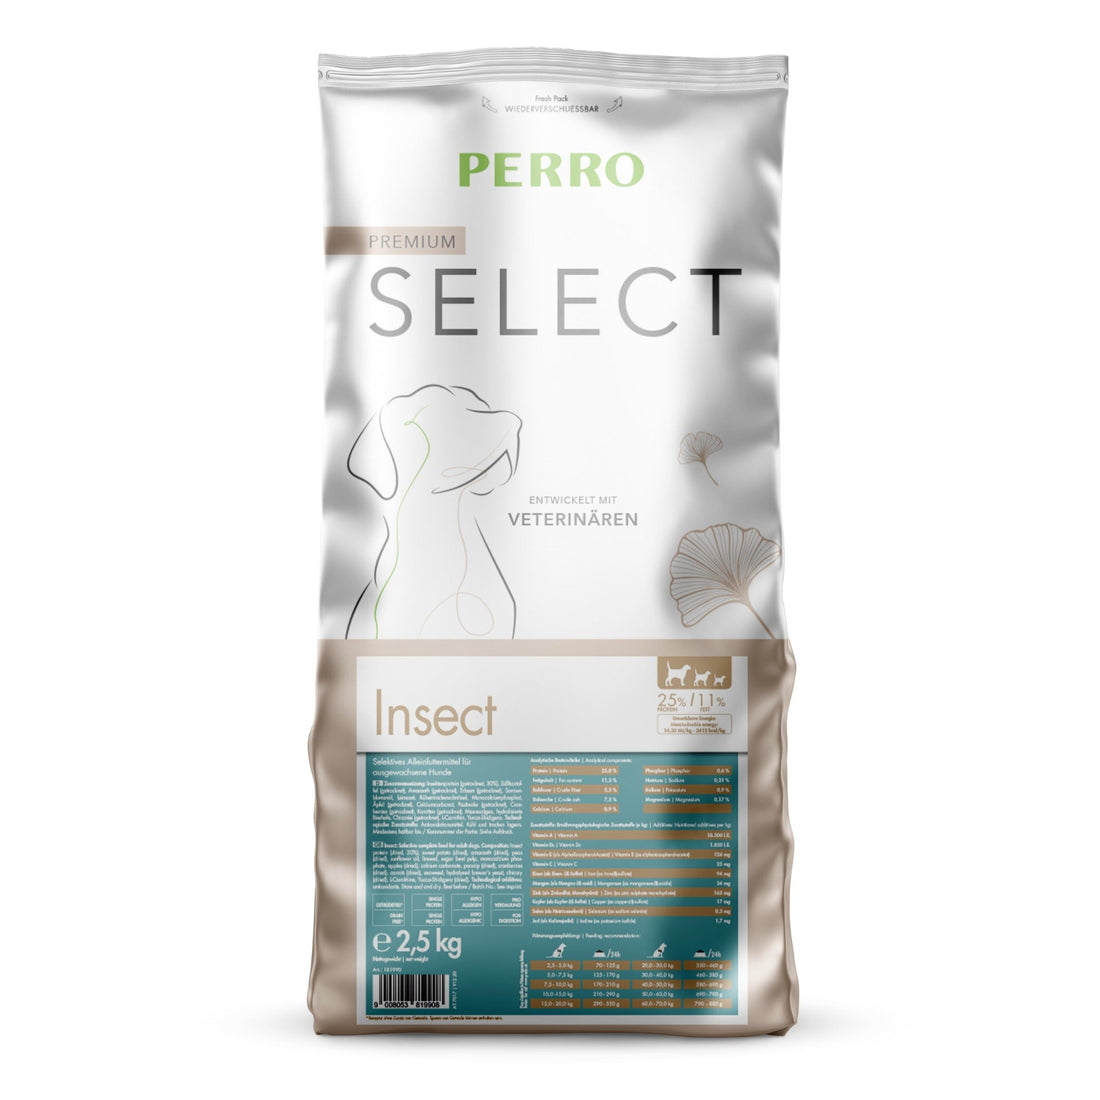 Perro Select Insect - Hunde Trockenfutter - Woofshack